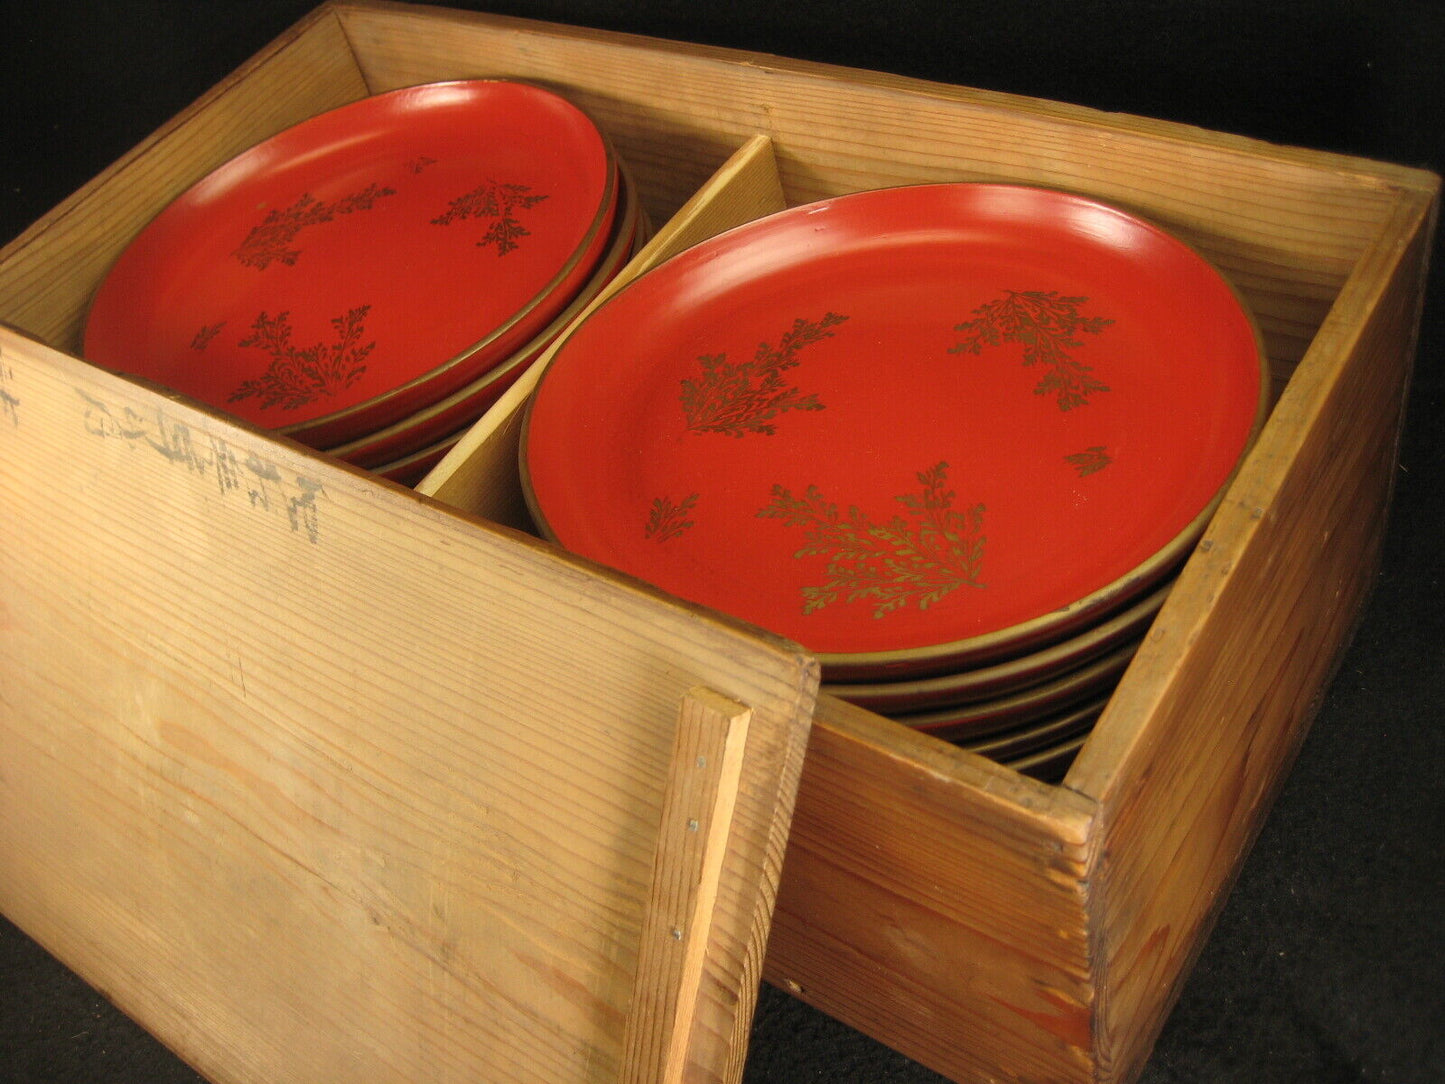 Antique (c. 1890) Japanese Kashizara Dish Plate Wood Red Lacquer Makie 7"